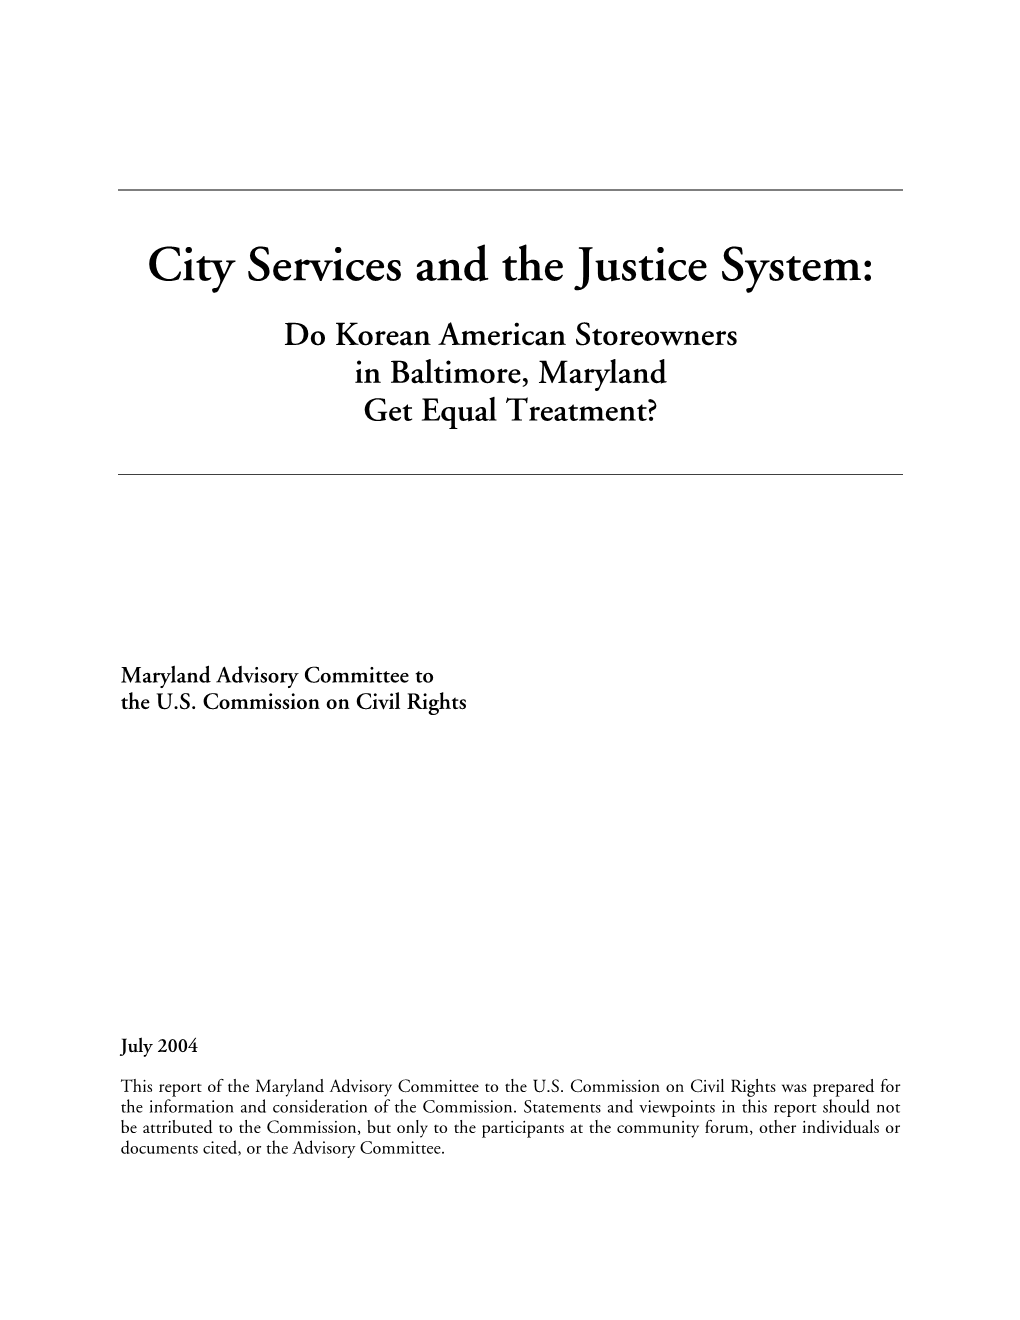 City Services and the Justice System: Do Korean American Storeowners